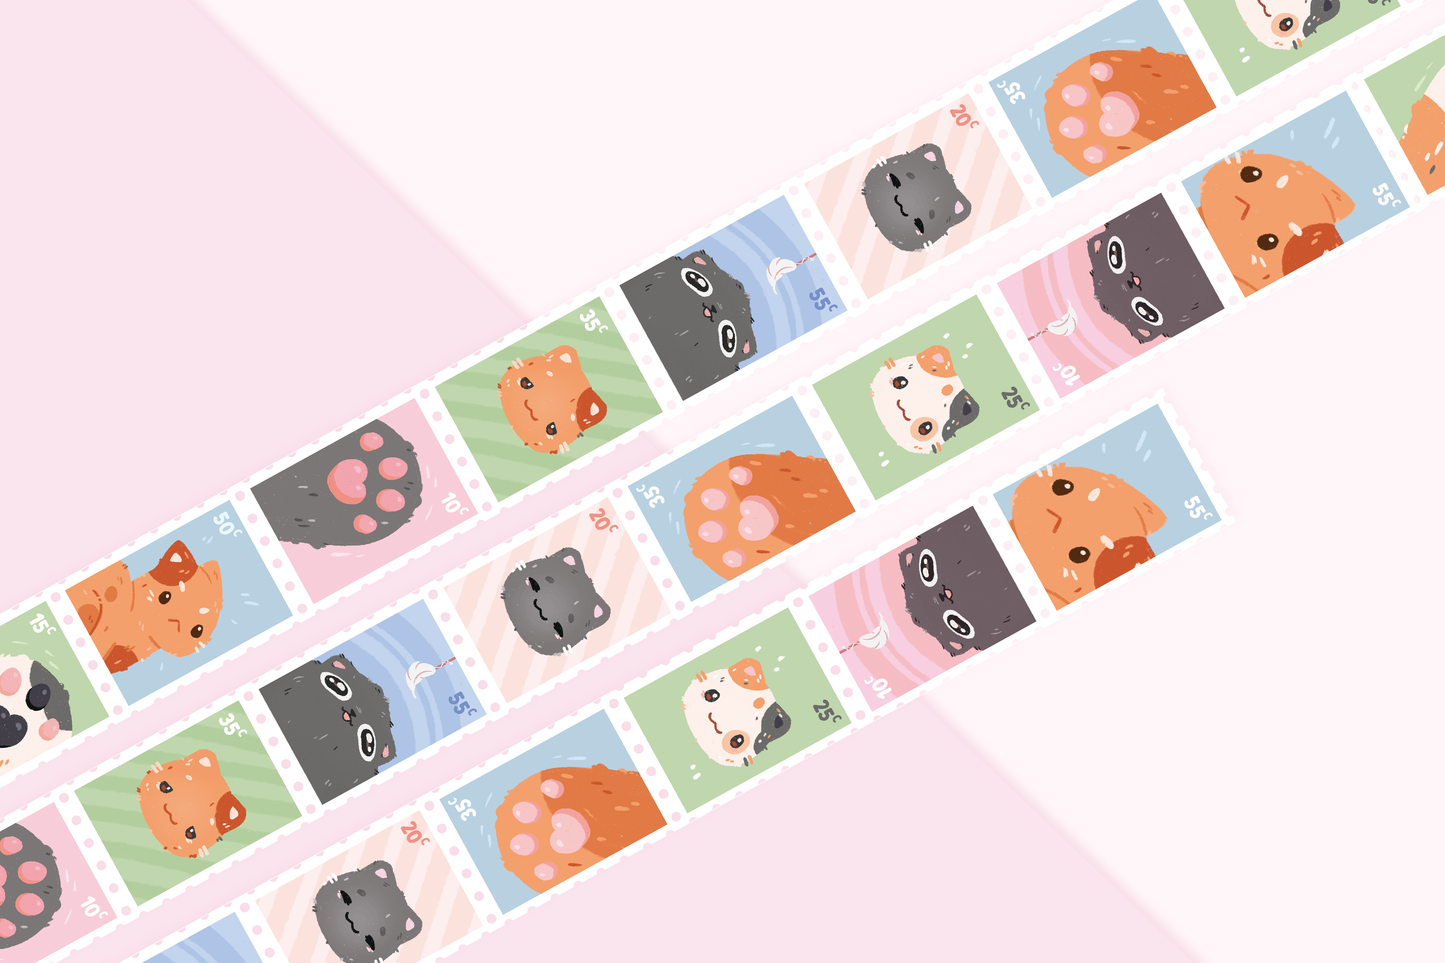 Angry Cat Stamp Washi Tape | 10m Roll | Artist Masking Tape | Decorative Planner Tape | Kawaii Calendar Journal Stationery